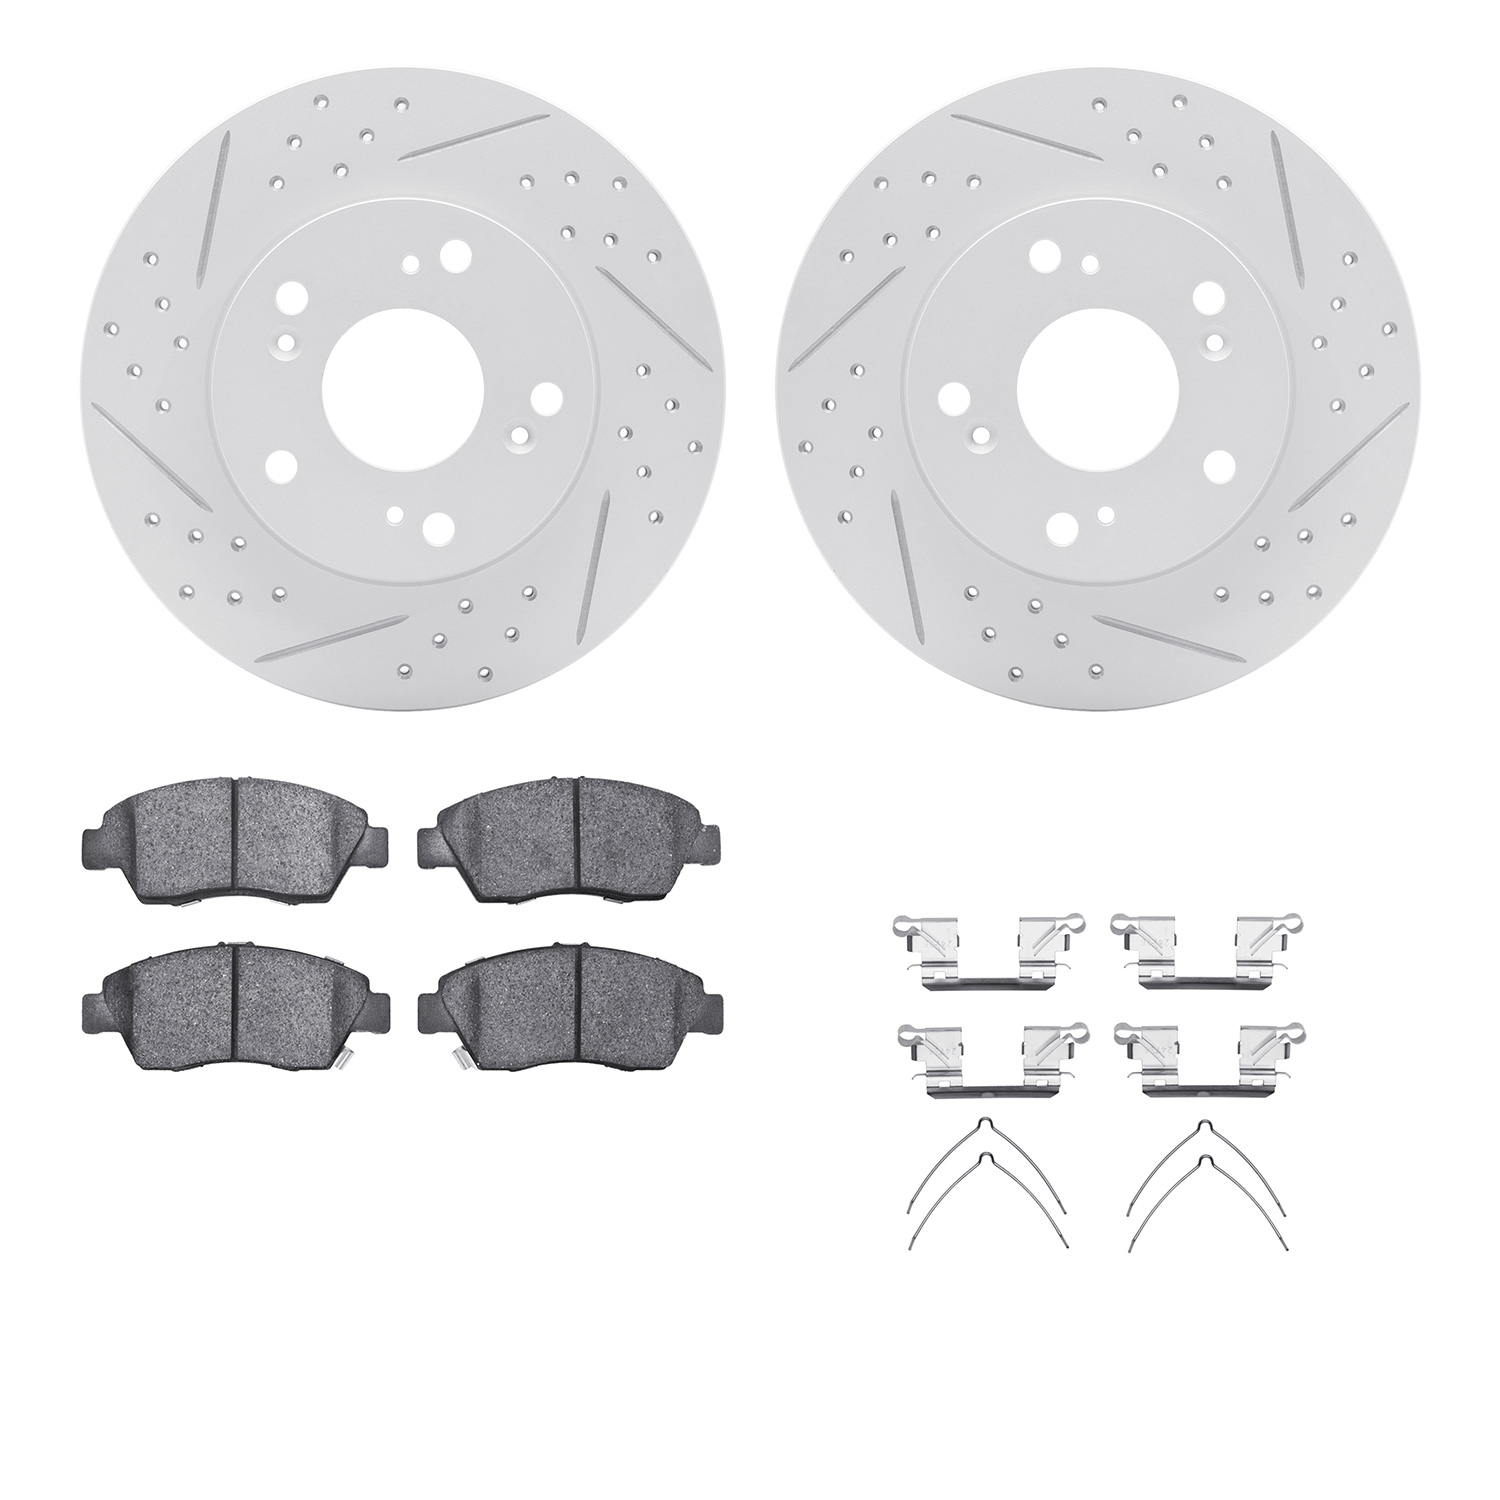 2512-59040 Geoperformance Drilled/Slotted Rotors w/5000 Advanced Brake Pads Kit & Hardware, 2012-2015 Acura/Honda, Position: Fro